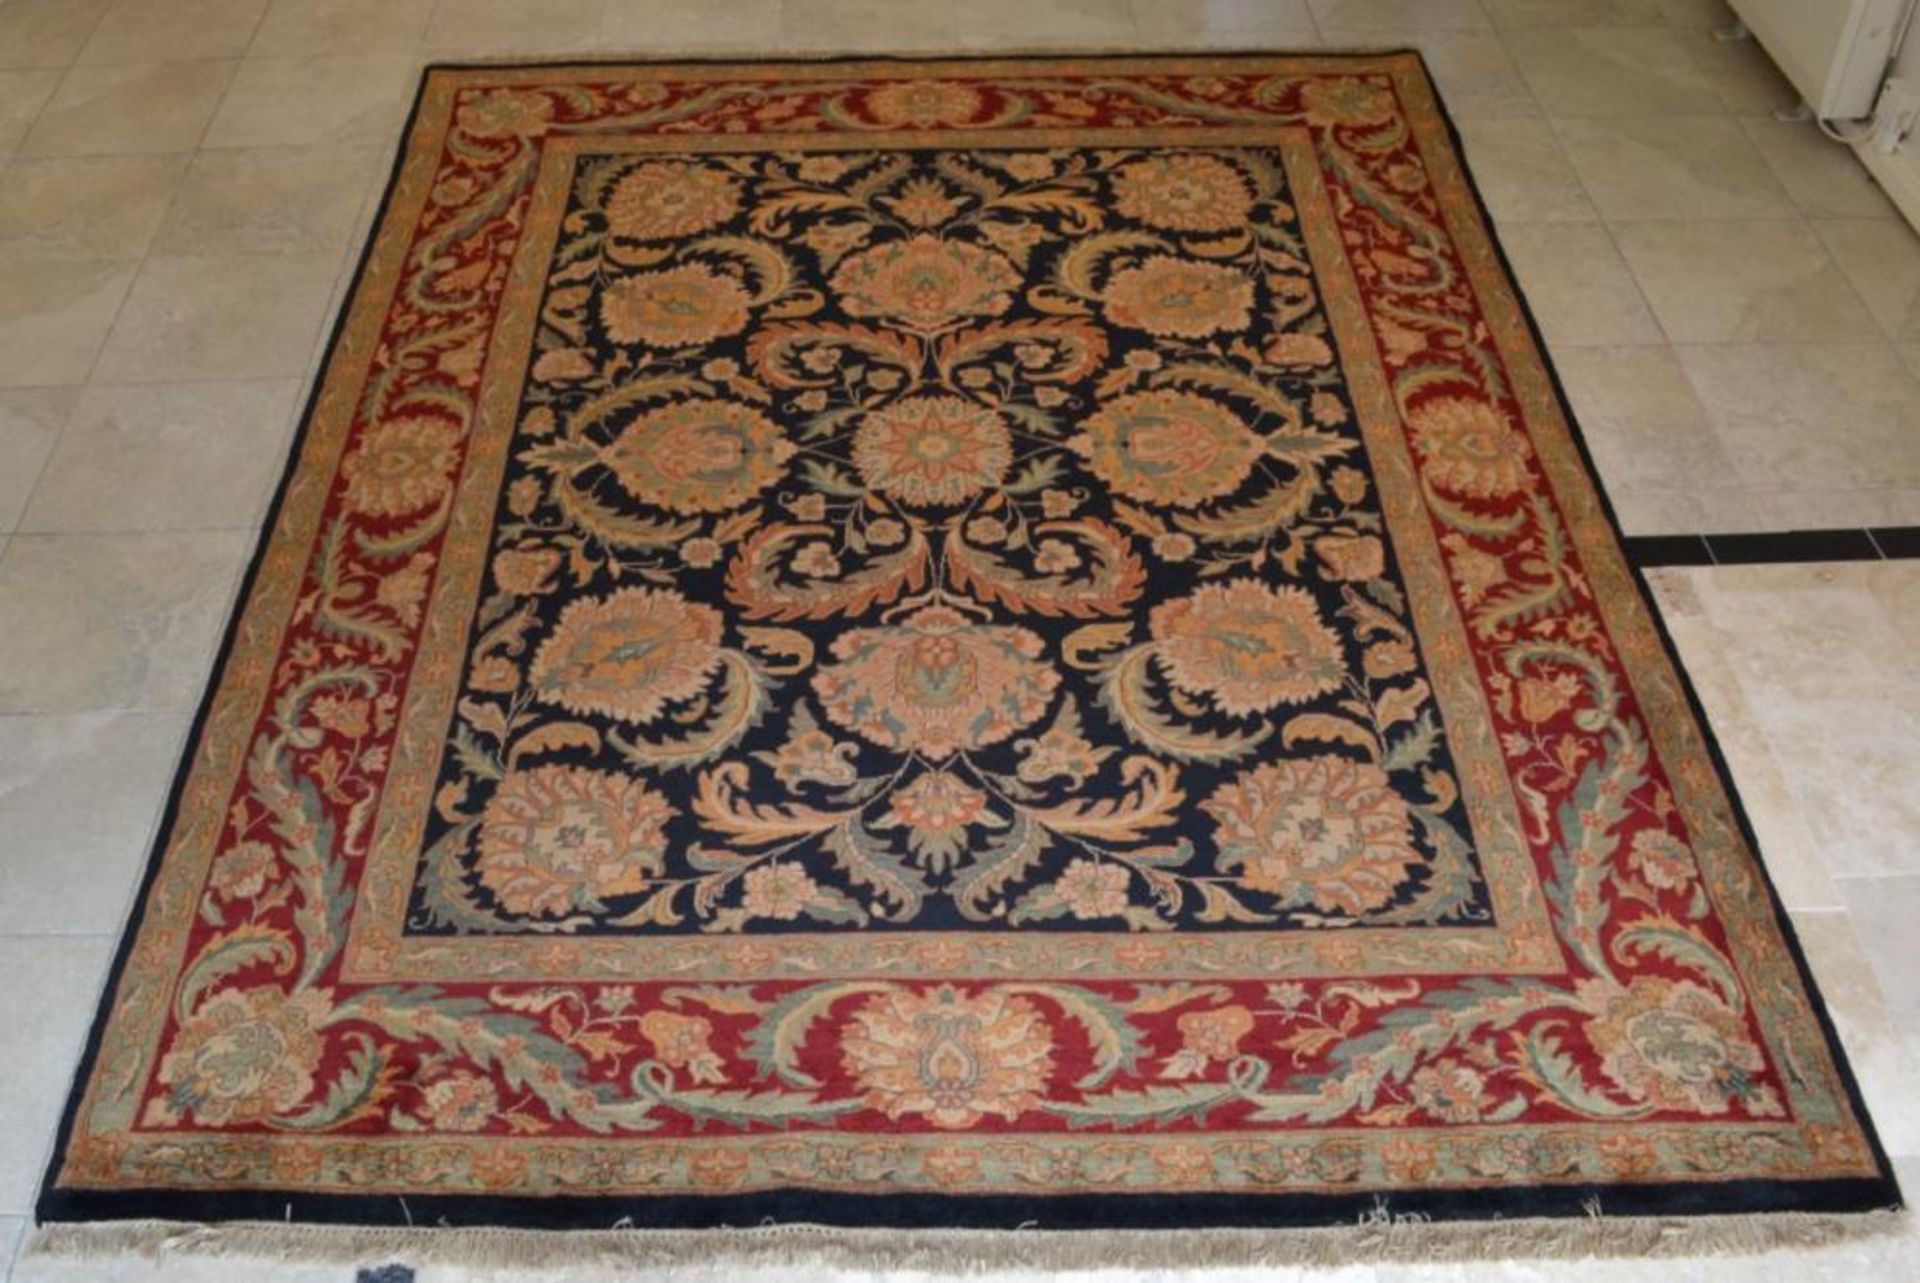 1 x Red and Black Jaipur Handknotted Carpet - Handwoven In Jaipur With Handspun Wool And Vegetable - Image 12 of 16